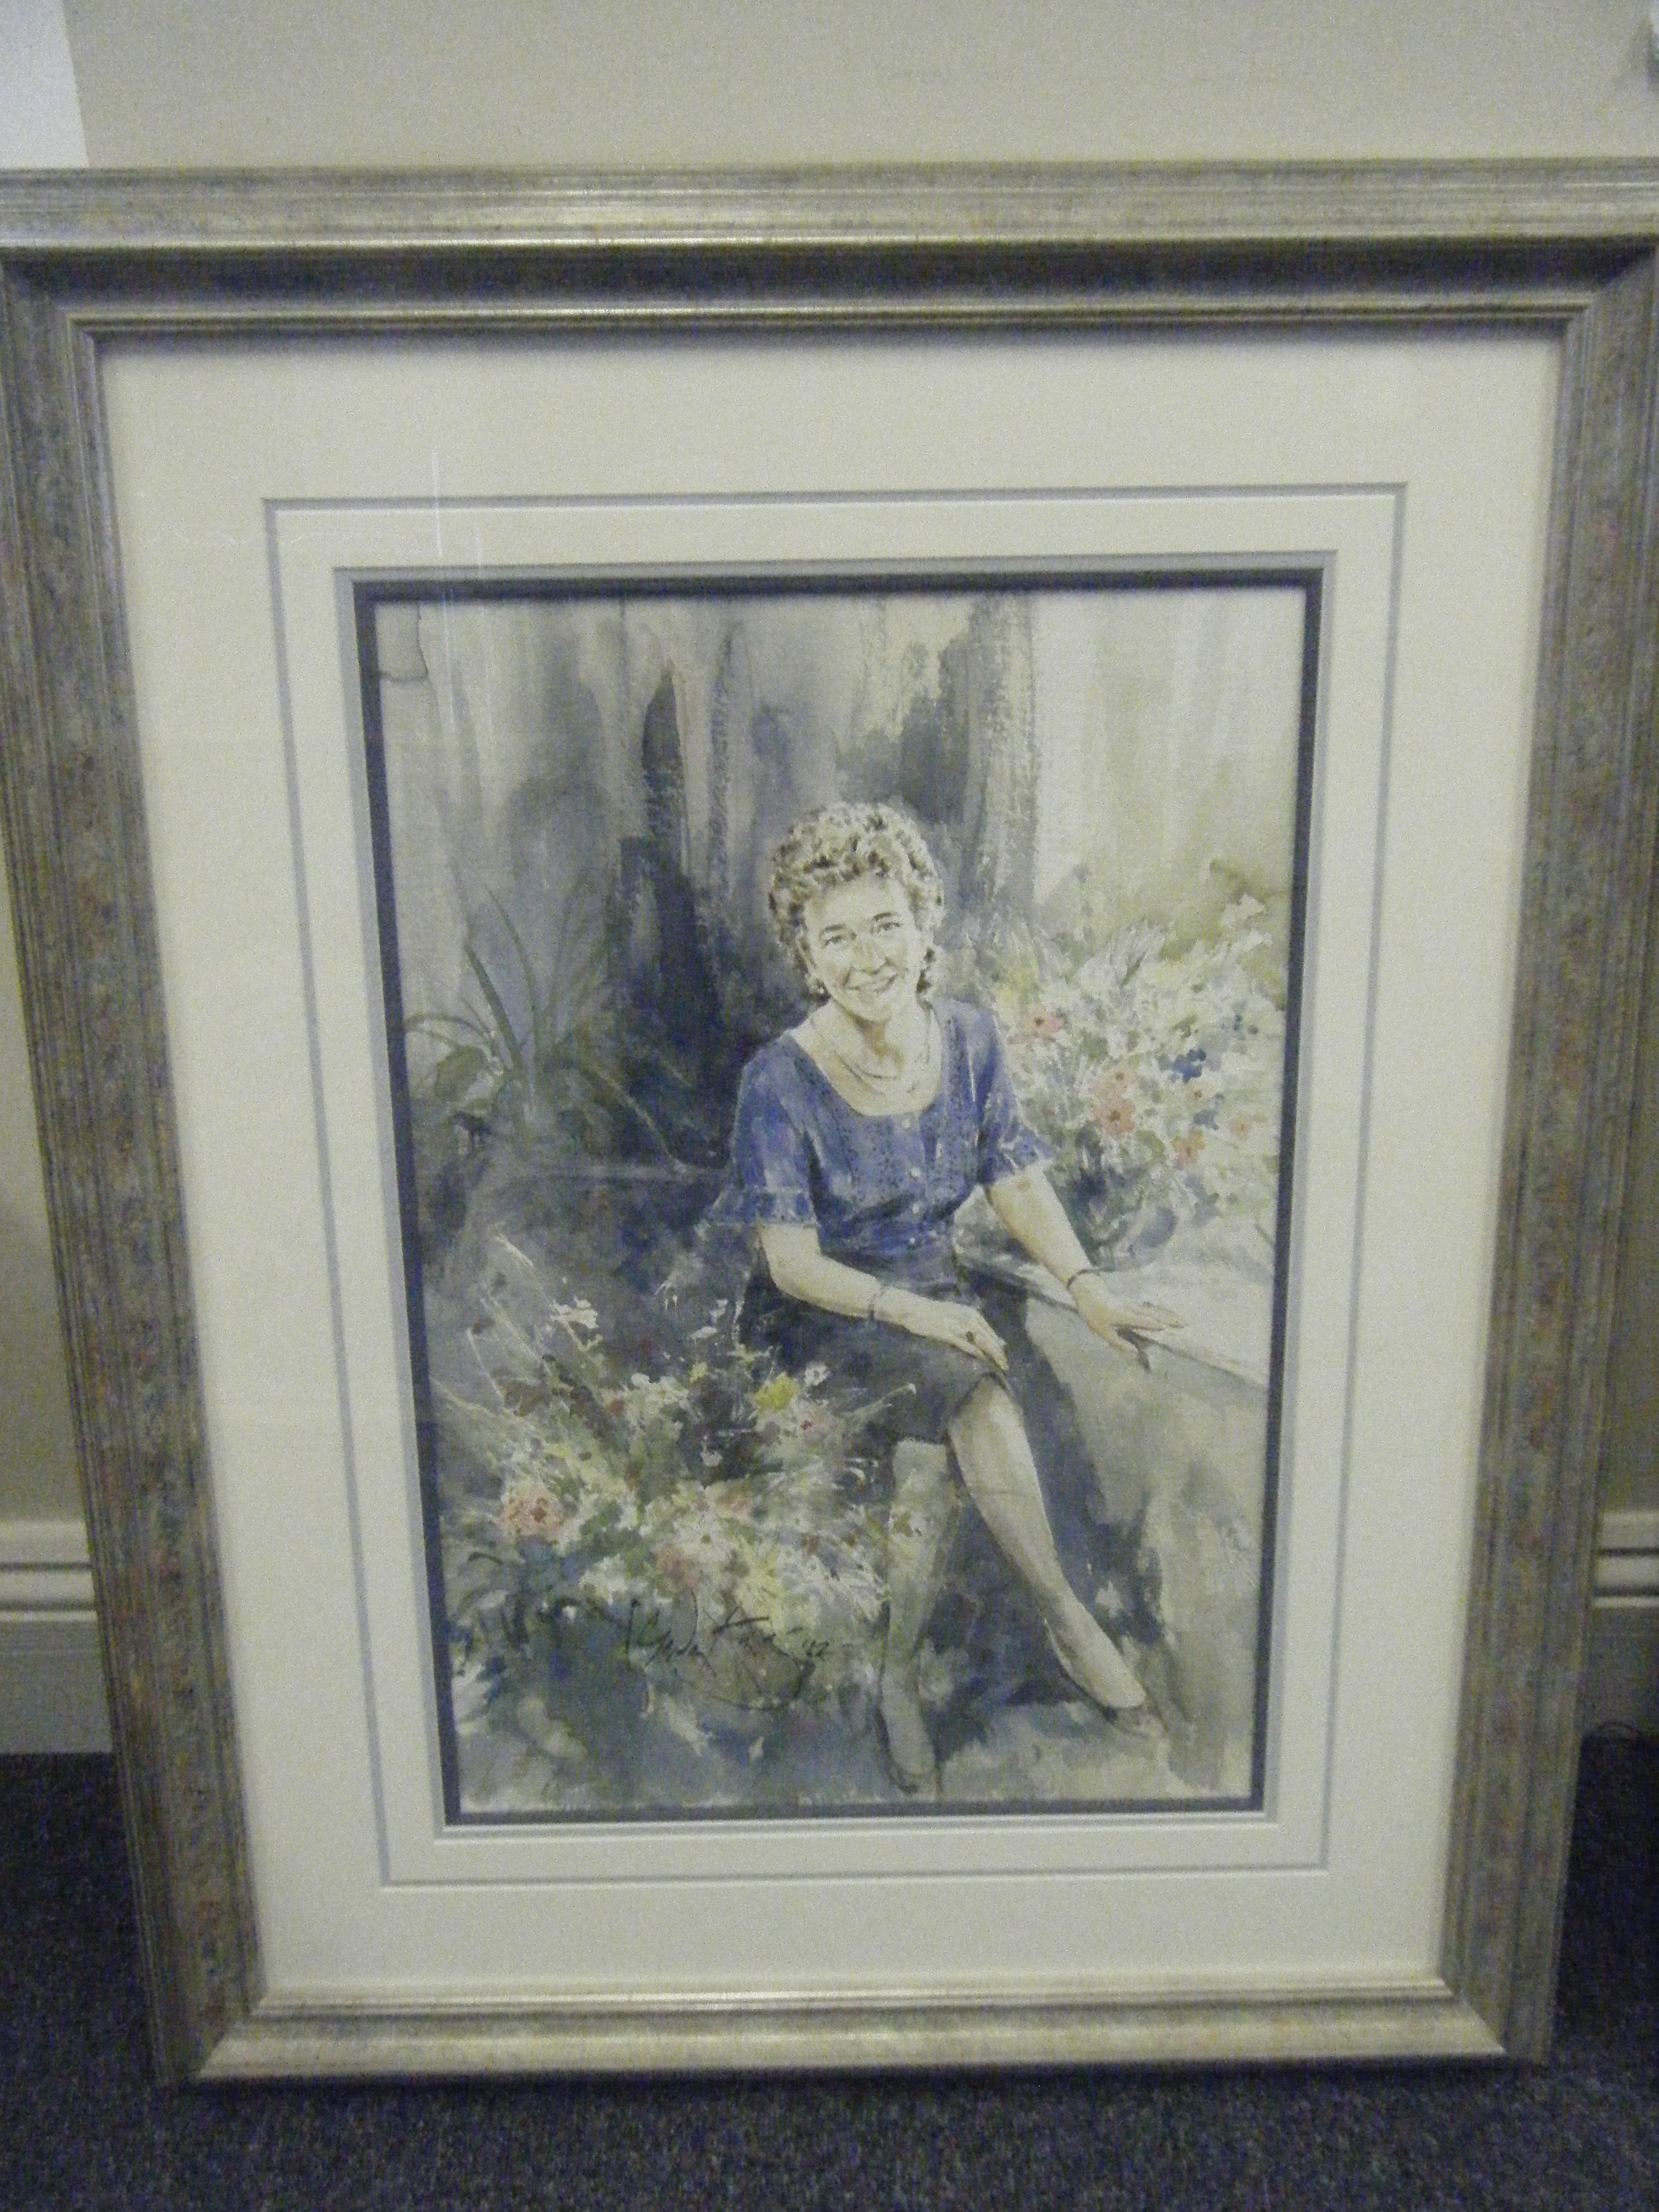 Gordon King, f/g watercolour dated 92` seated Female amongst flowers, 20" x 24" in exhibition